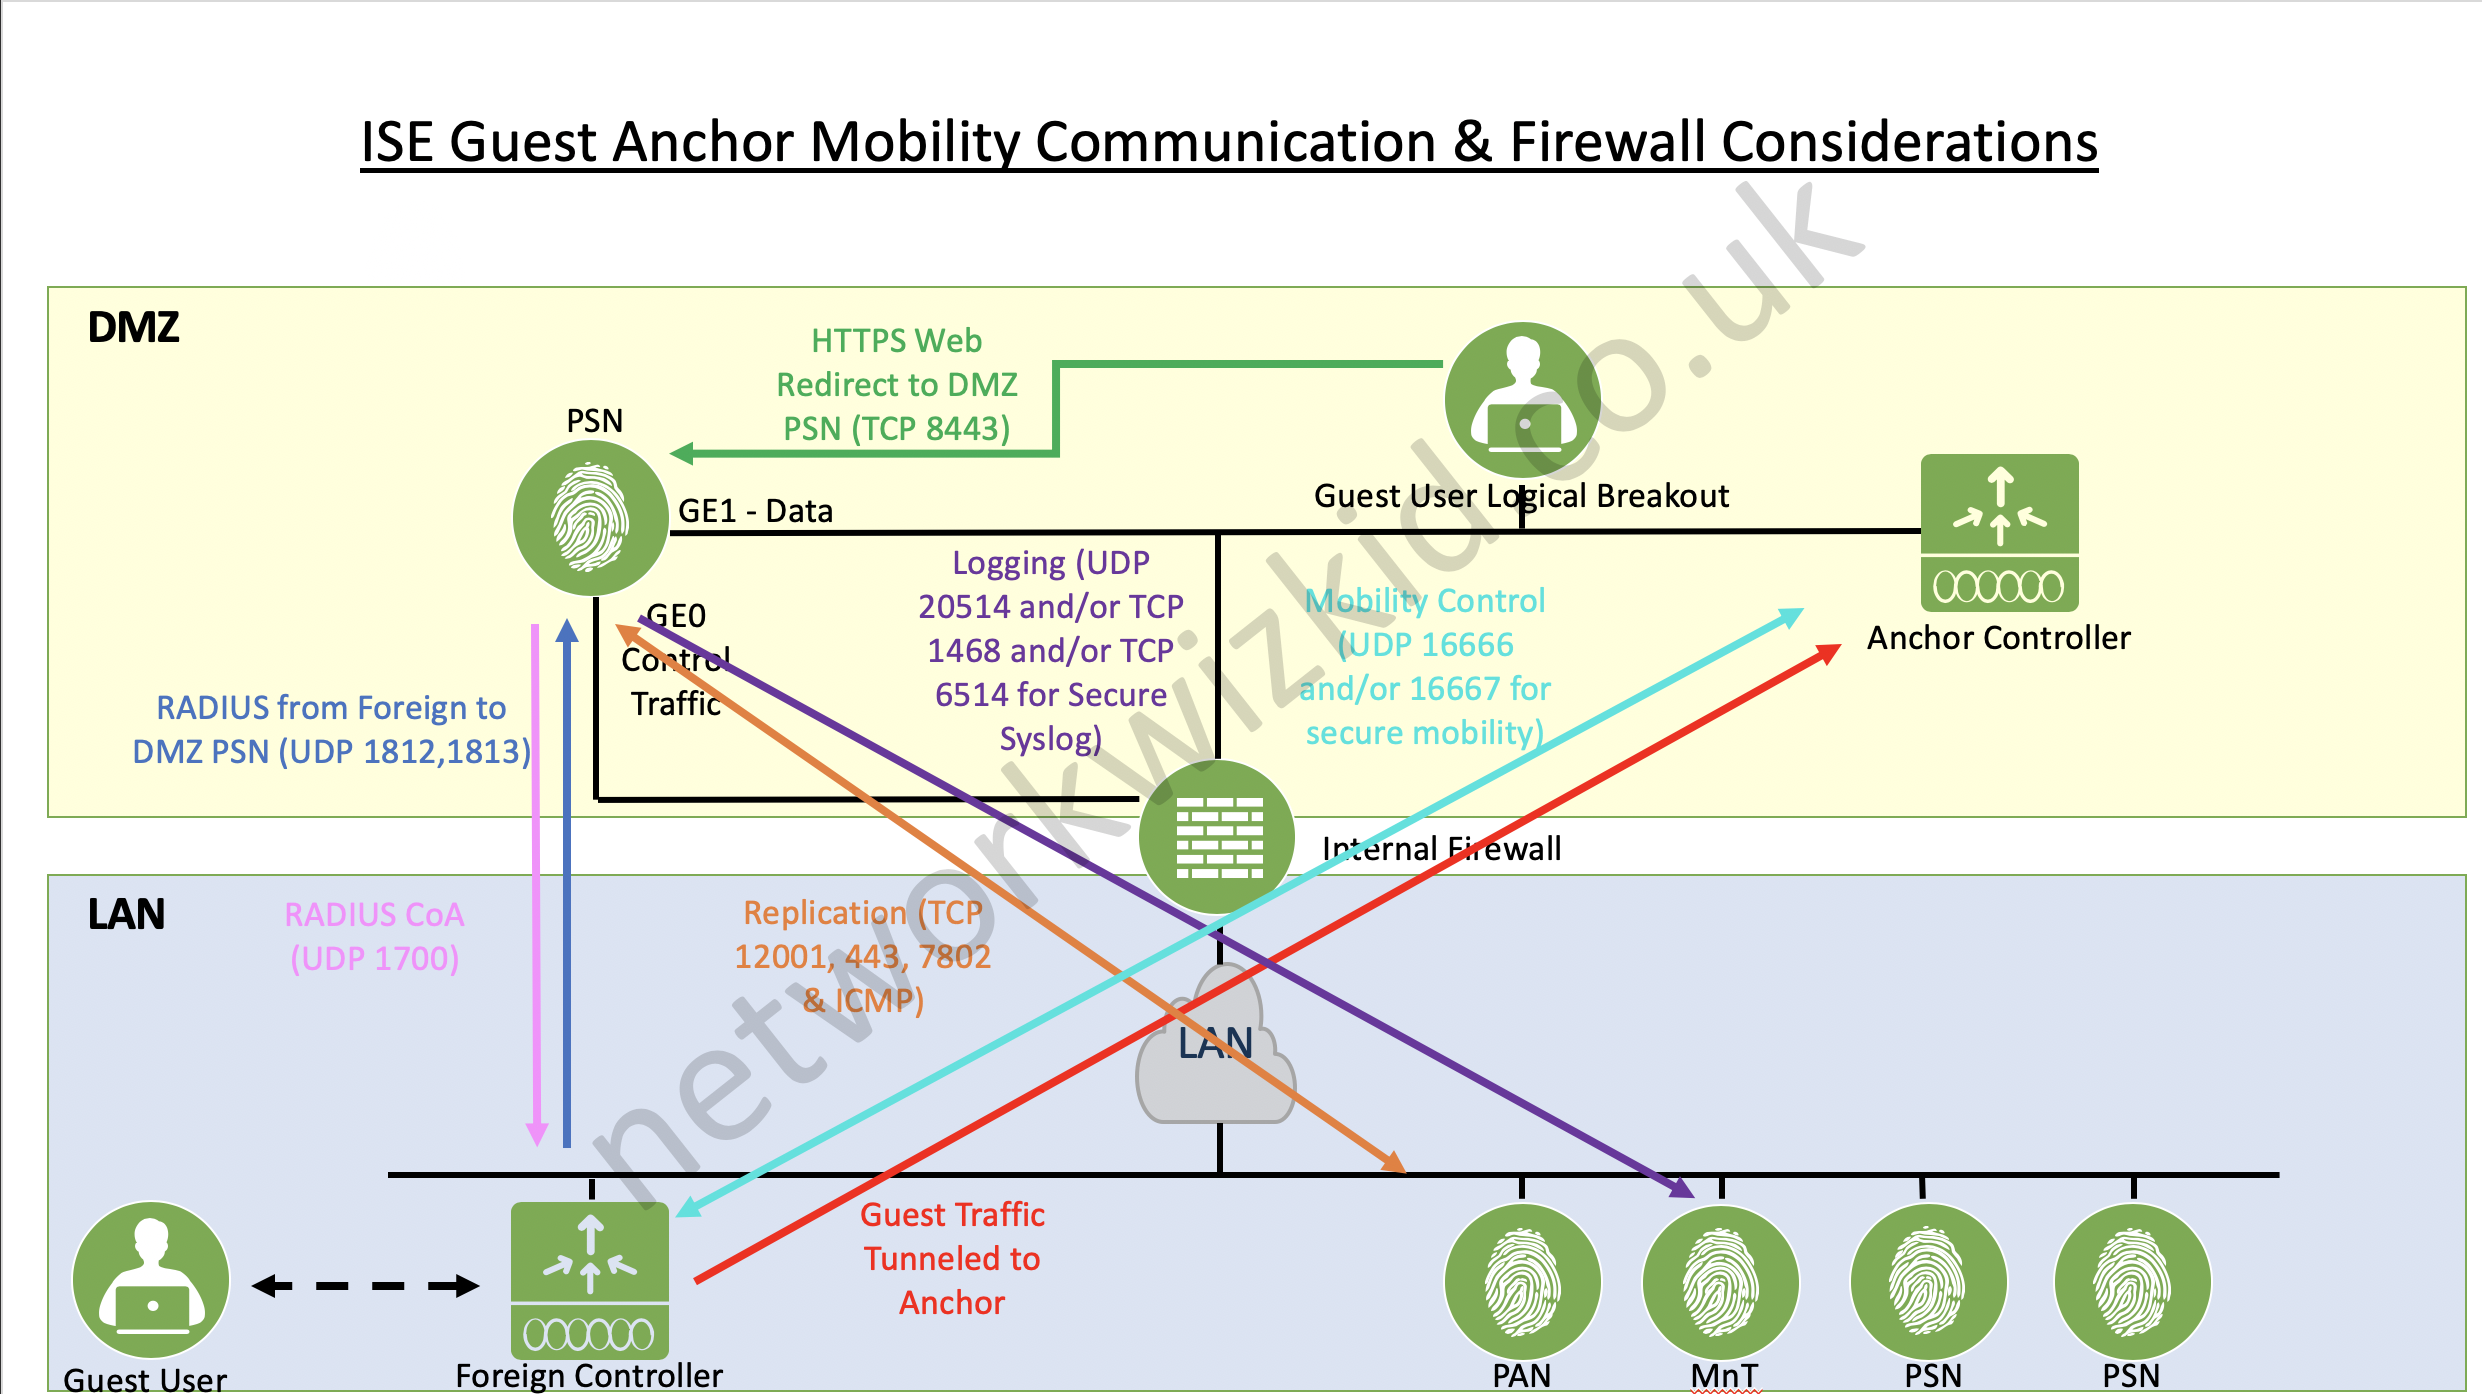 Cisco ISE Guest Mobility Anchor Firewall Considerations